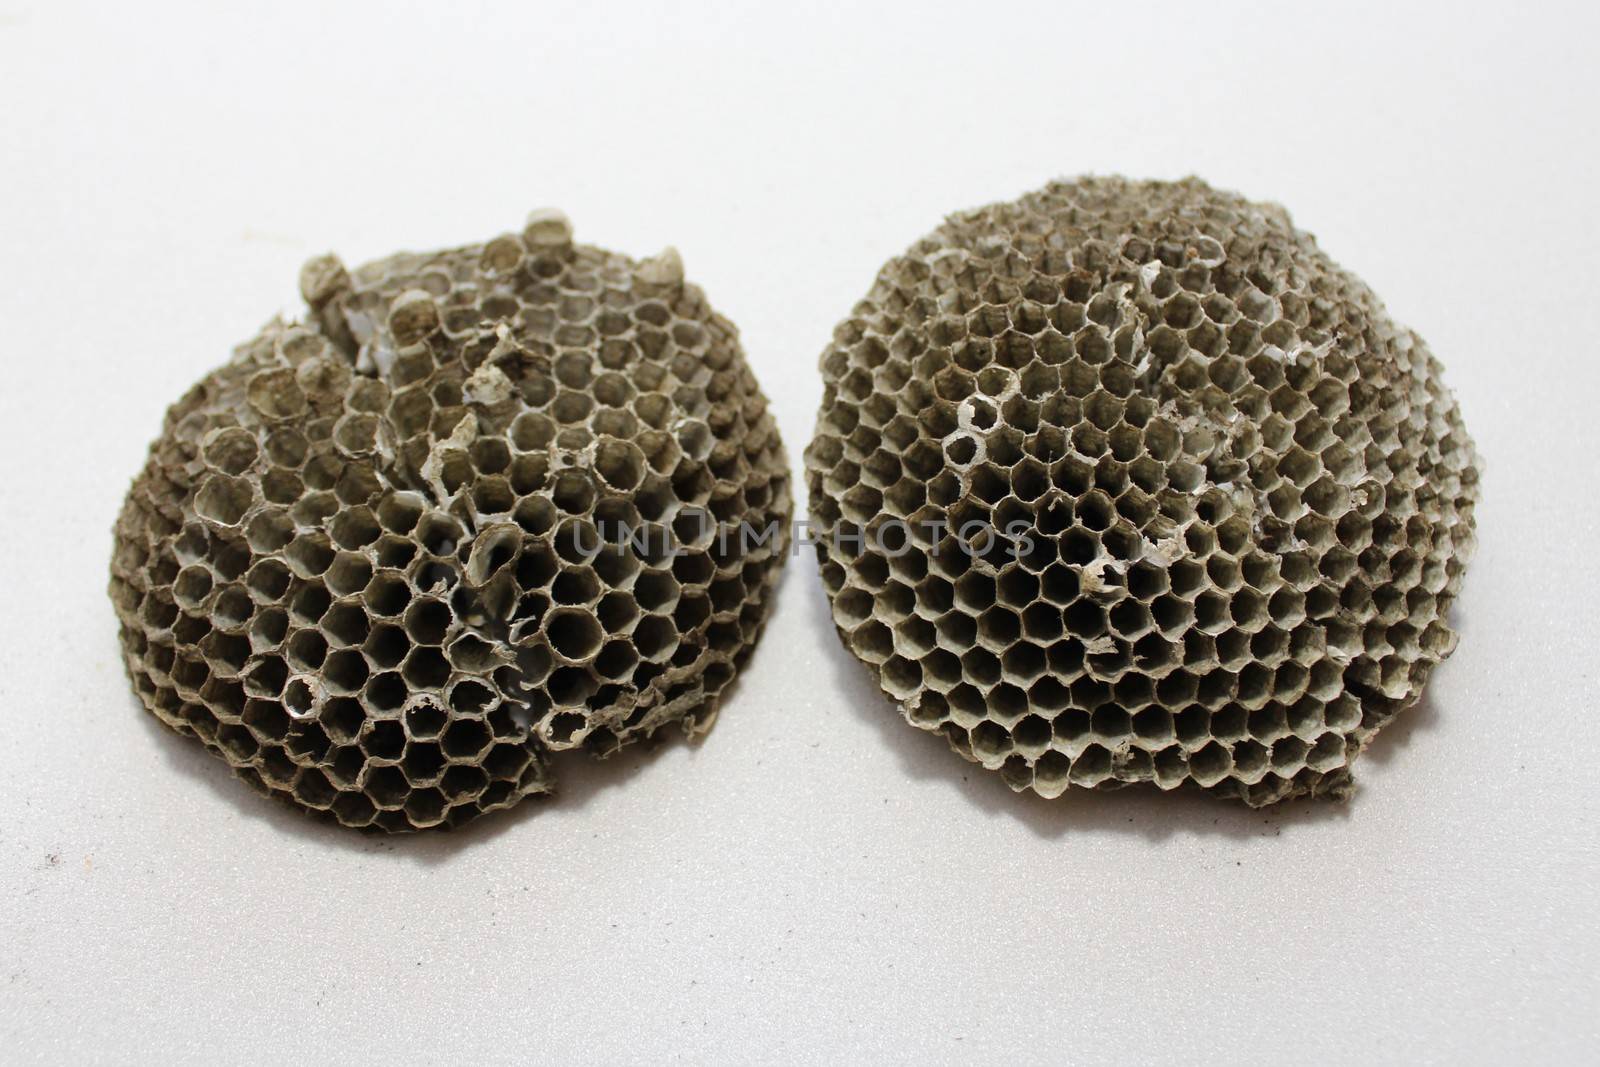 The picture shows a part of a wasp nest